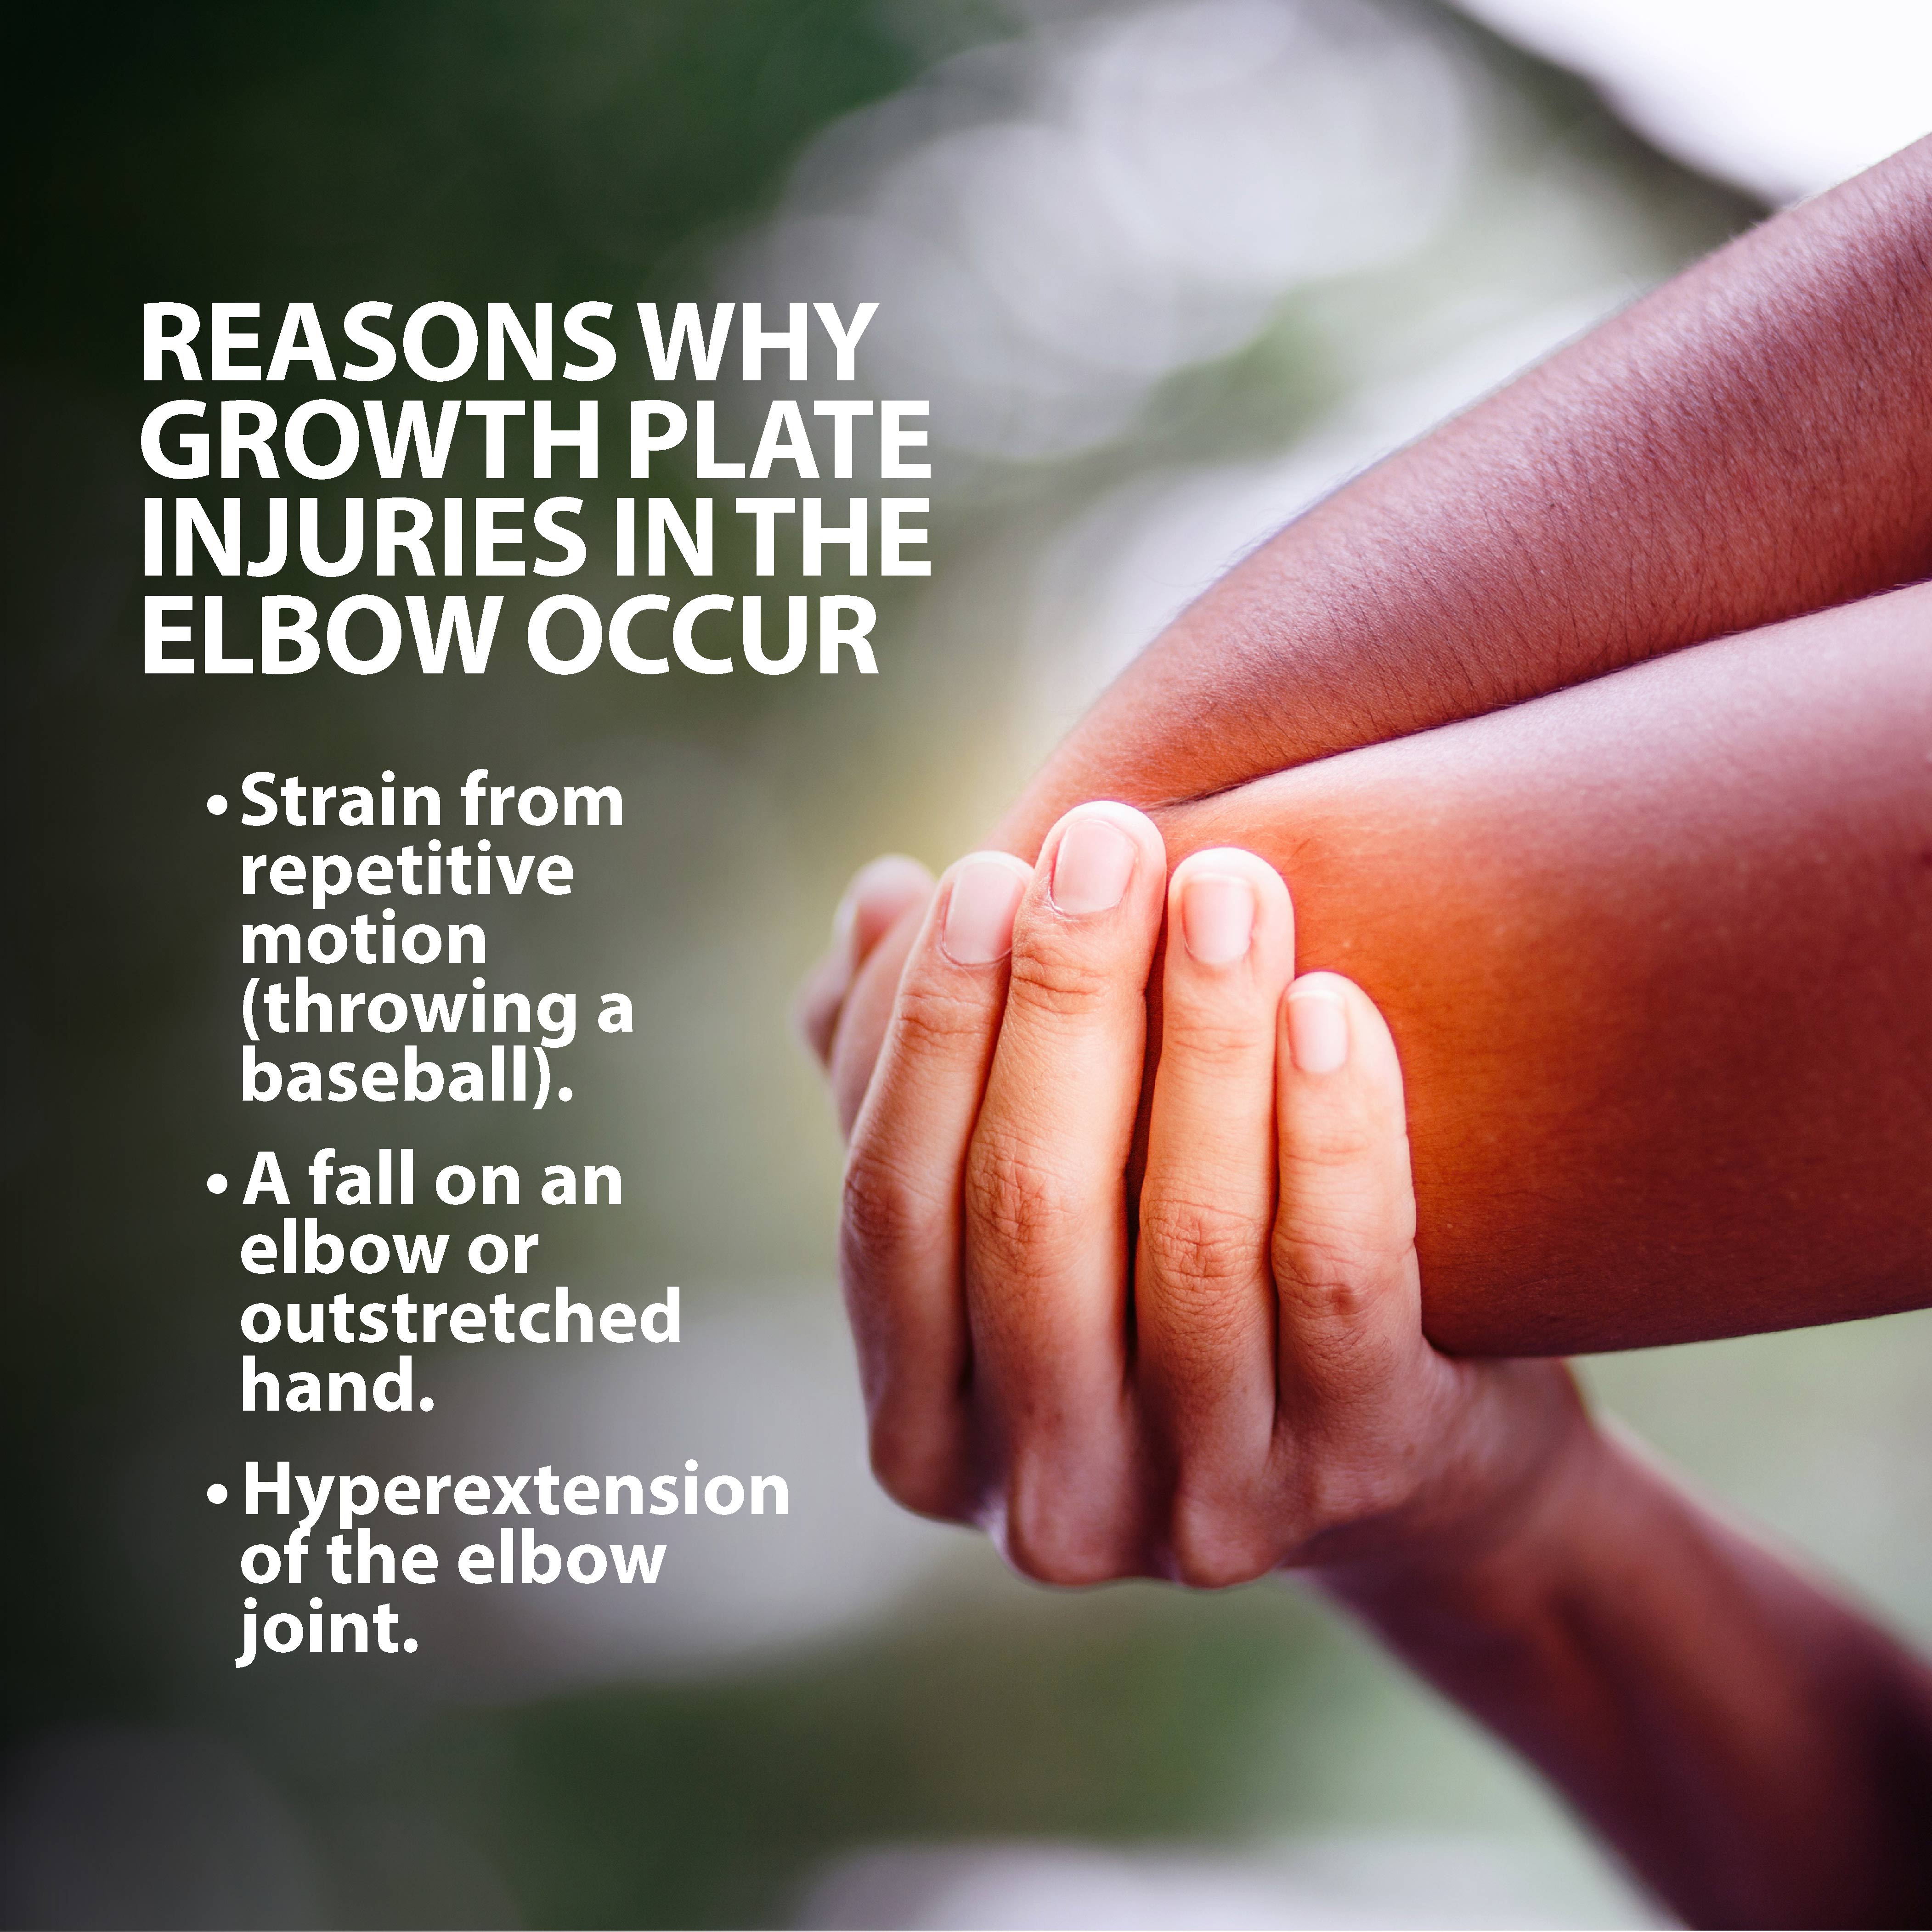 elbow growth plate injuries